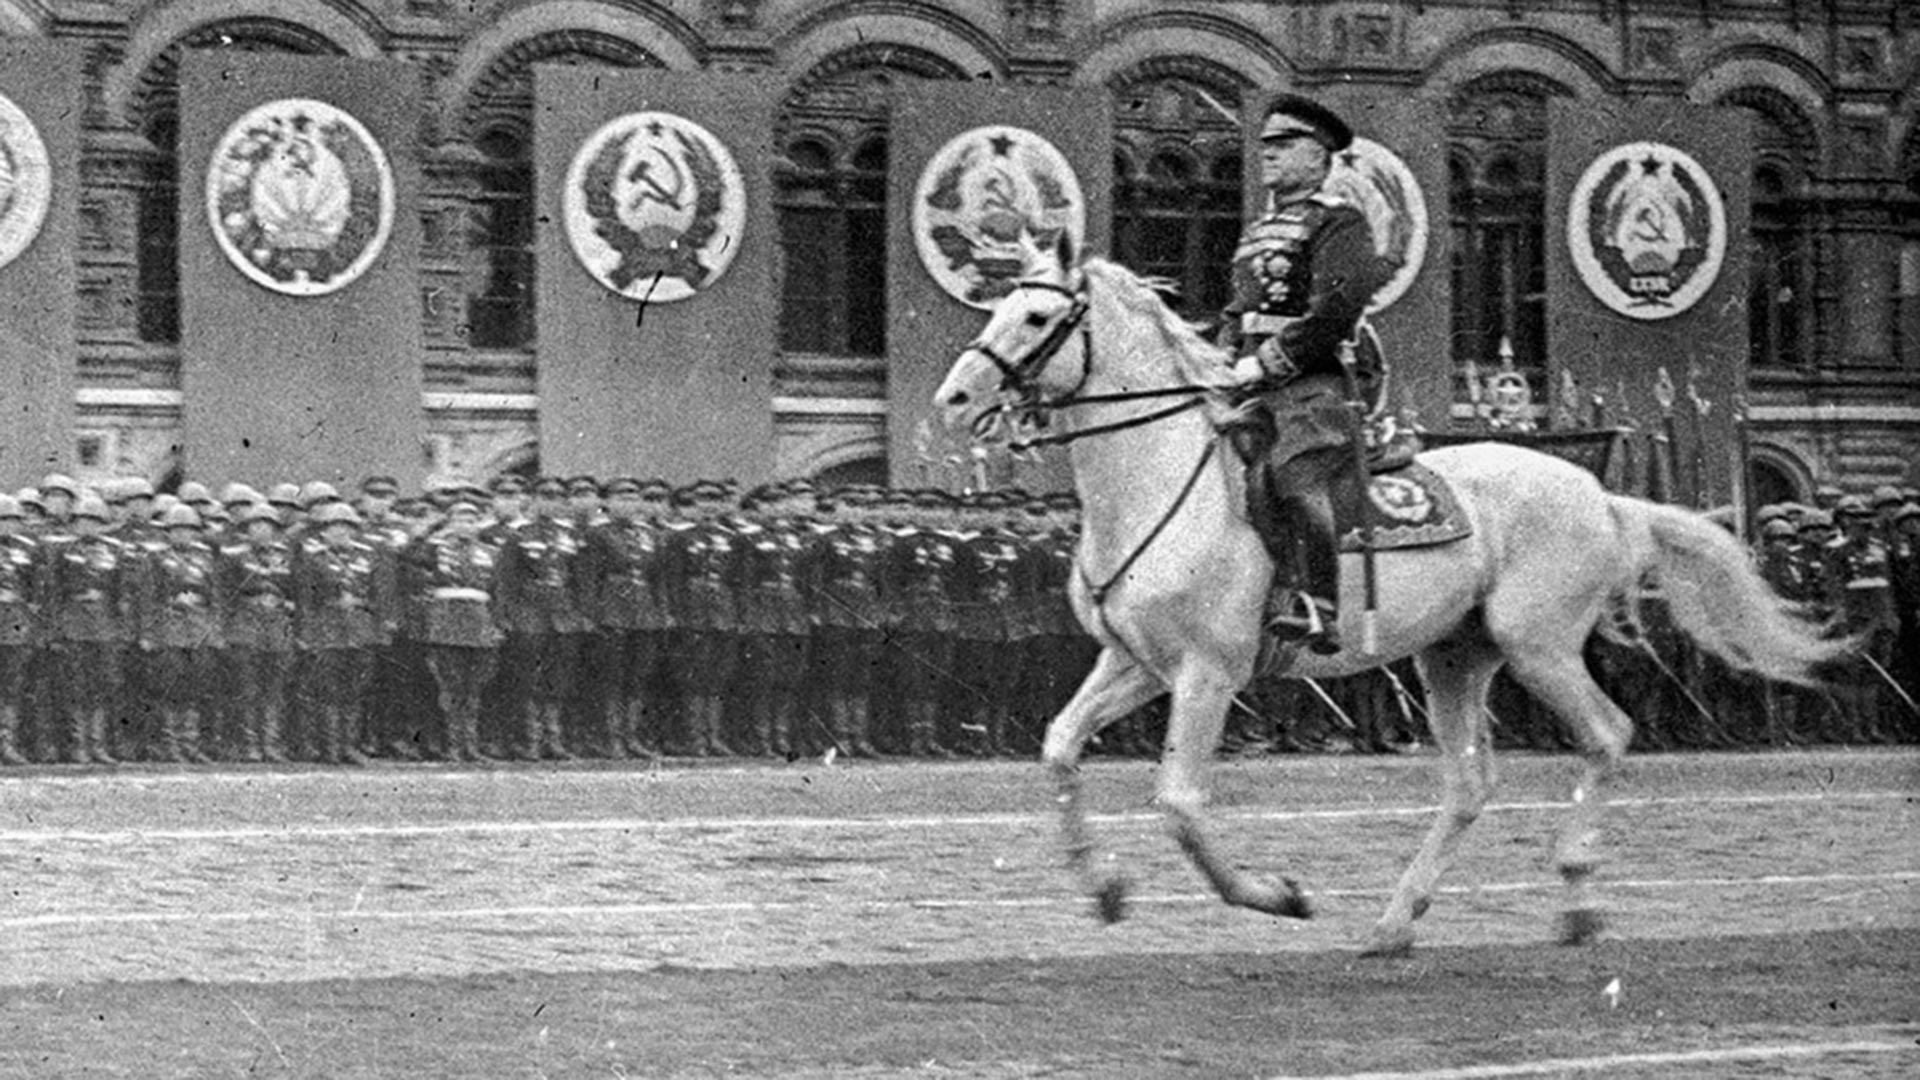 Zhukov inspecting the Victory Parade on the Red Square in Moscow.